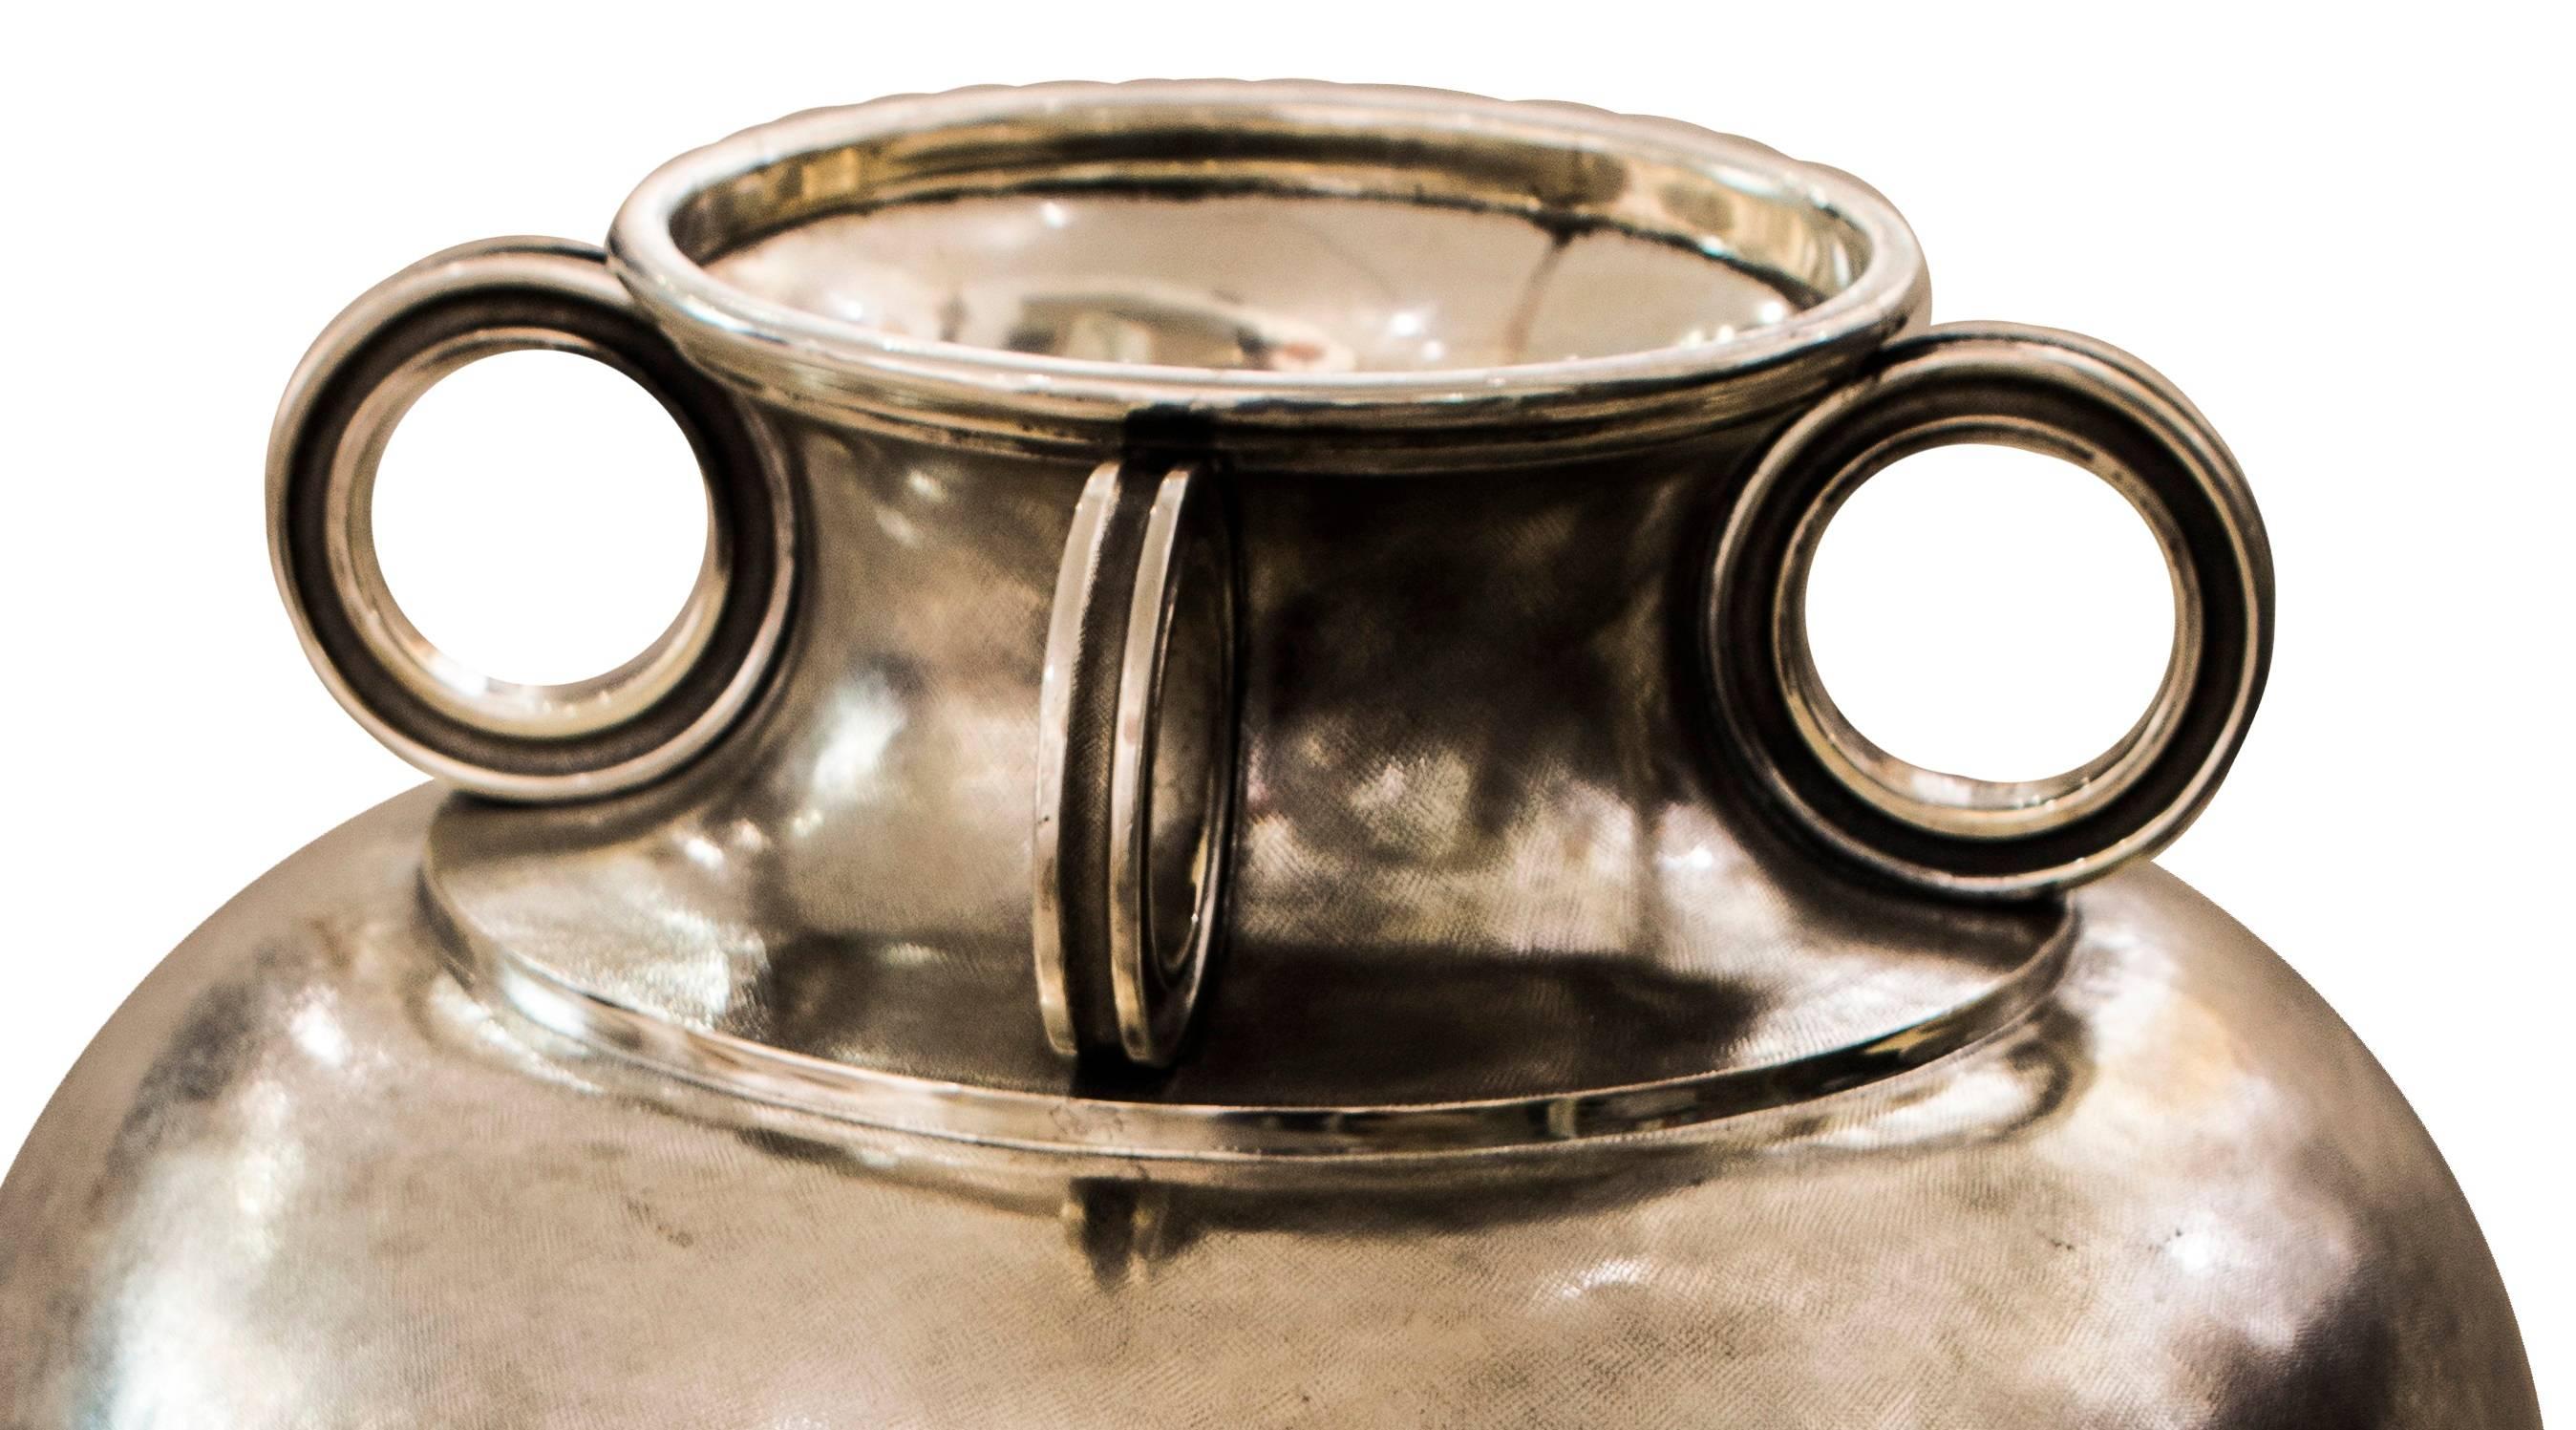 Buccellati Vase, circa 1940 - Fascist period.

Silver 800 with fully machined chisel body. Neck decorated with four grooved rings.
Stamp: Milano, silversmith Mario Buccellati.
Exceptional piece for pride and rarity, in perfect state.

Dimensions: 36